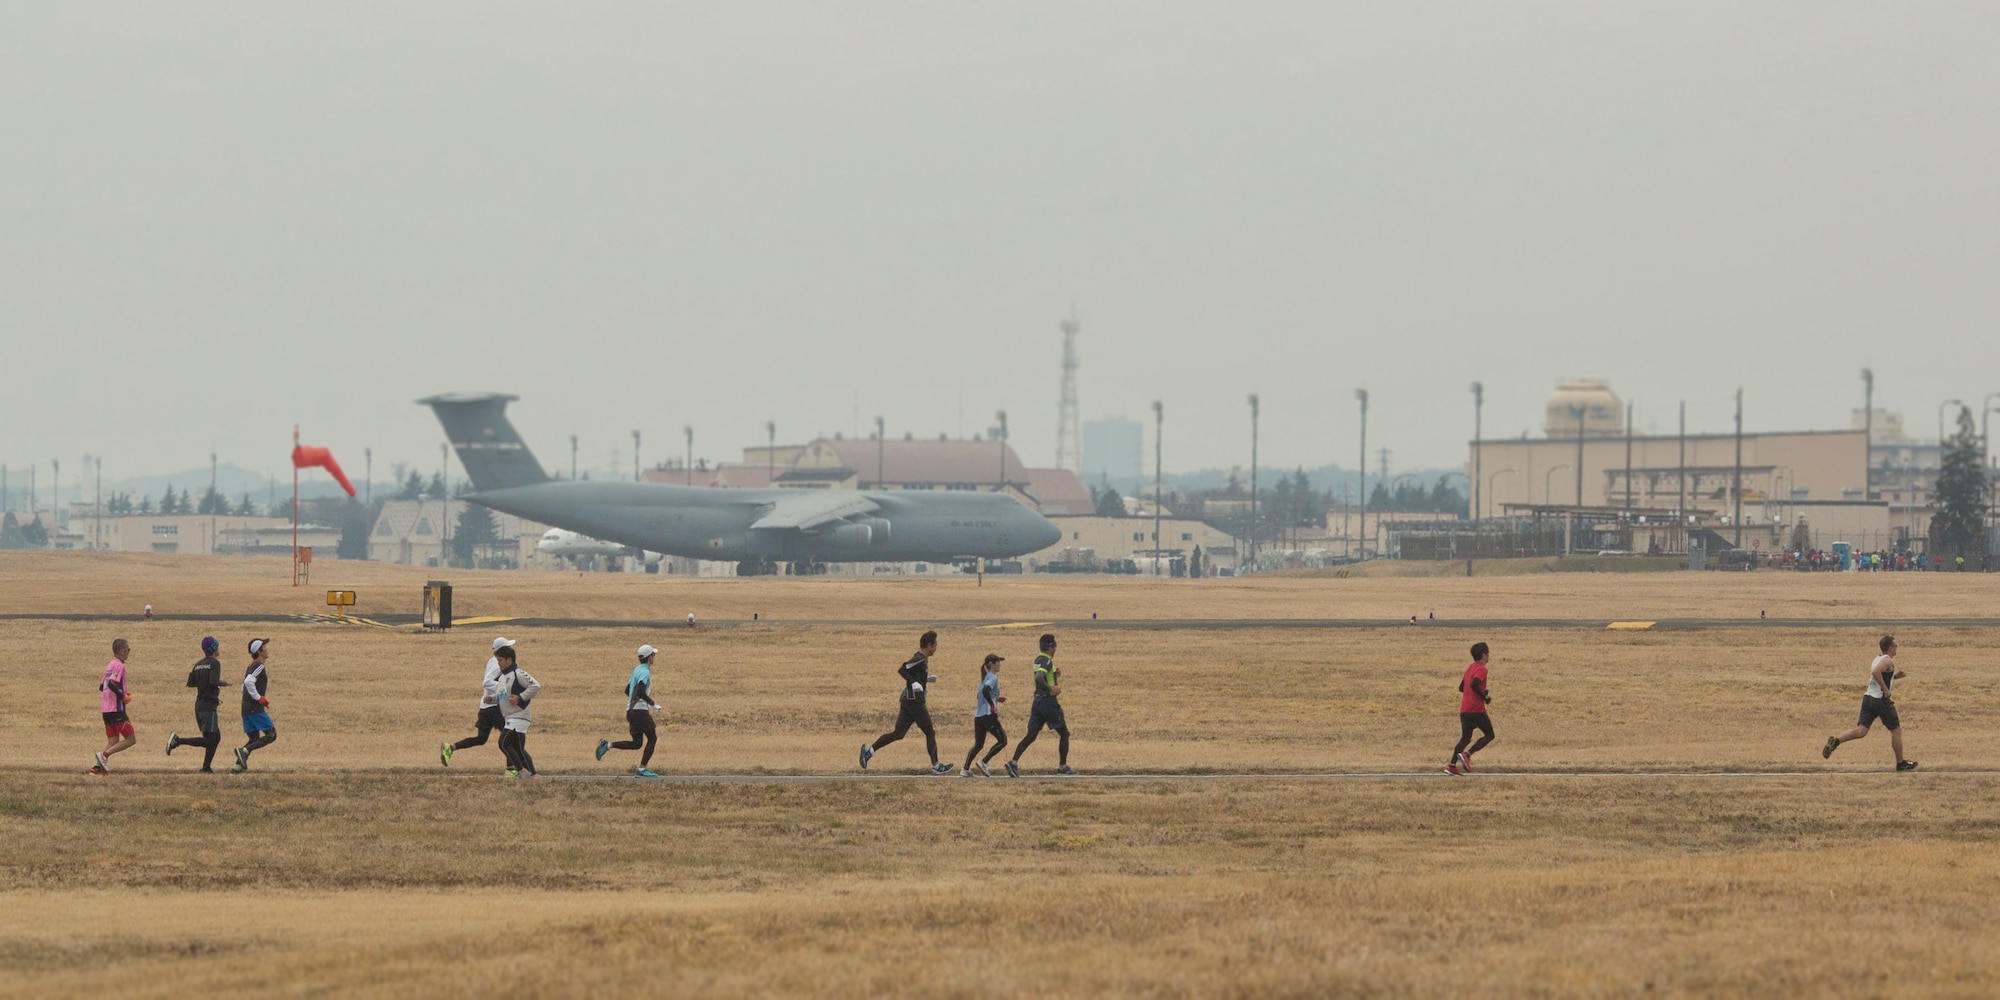 Japanese race participants run around Yokota Air Base, Japan, Jan. 17, 2016, during the 35th Annual Frostbite Run. Team Yokota hosted over 9,000 participants for the event, hosting multiple 2Ks, a 5K and a half marathon. (U.S. Air Force photo by Osakabe Yasuo/Released)